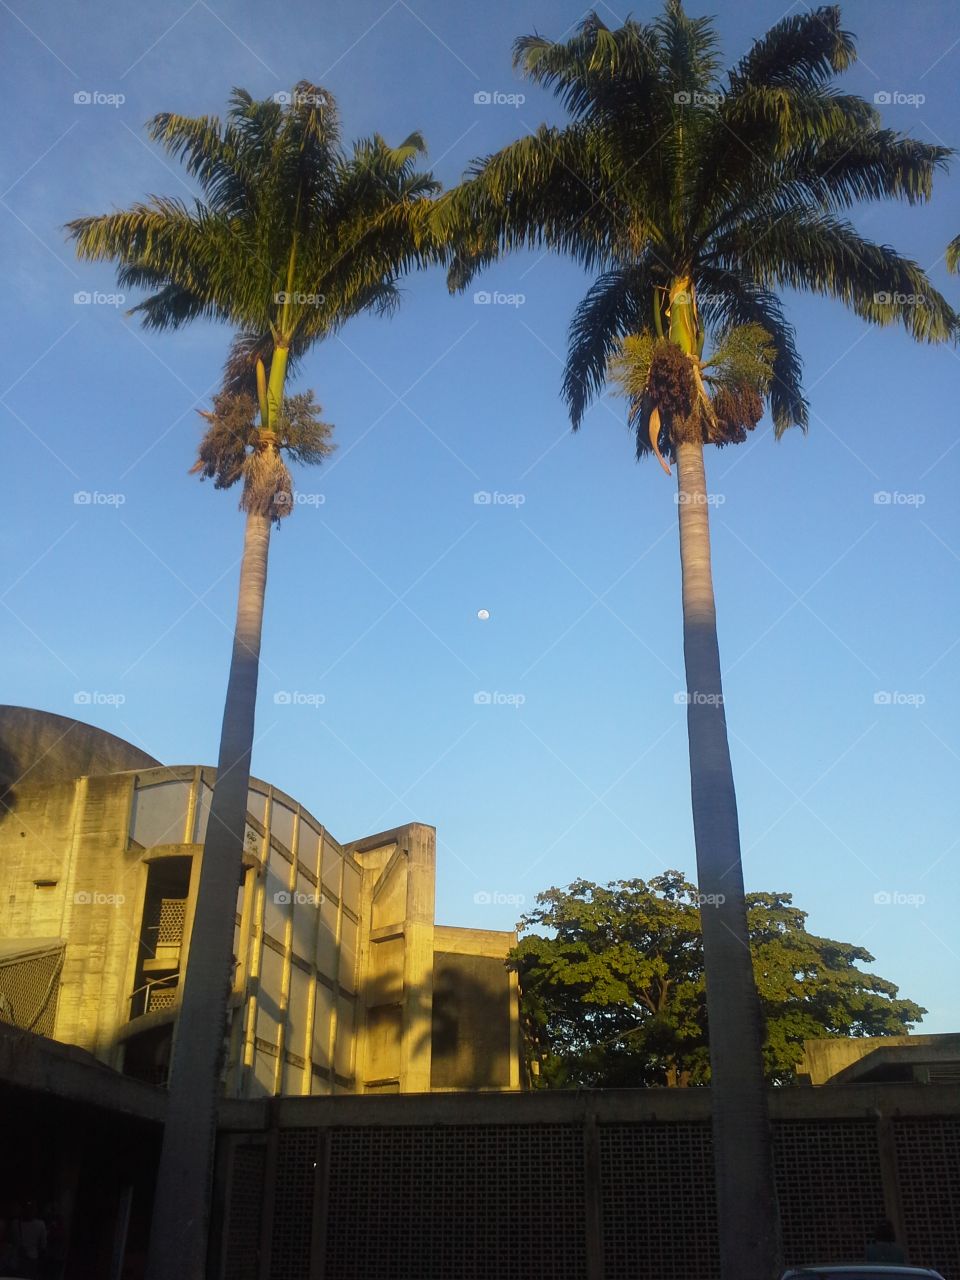 the full moon on the day captured in the middle of two palm trees